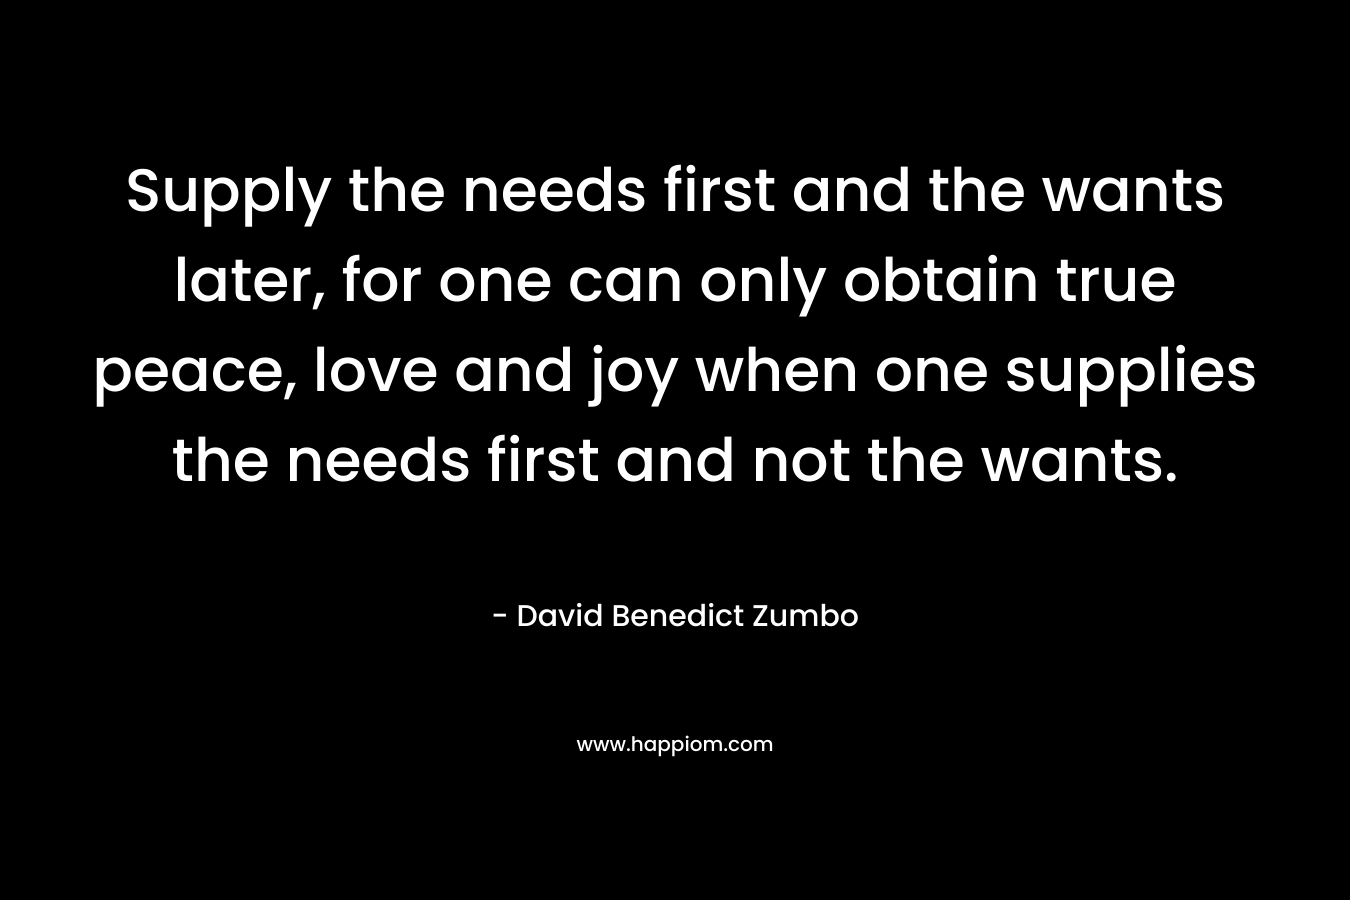 Supply the needs first and the wants later, for one can only obtain true peace, love and joy when one supplies the needs first and not the wants. – David Benedict Zumbo